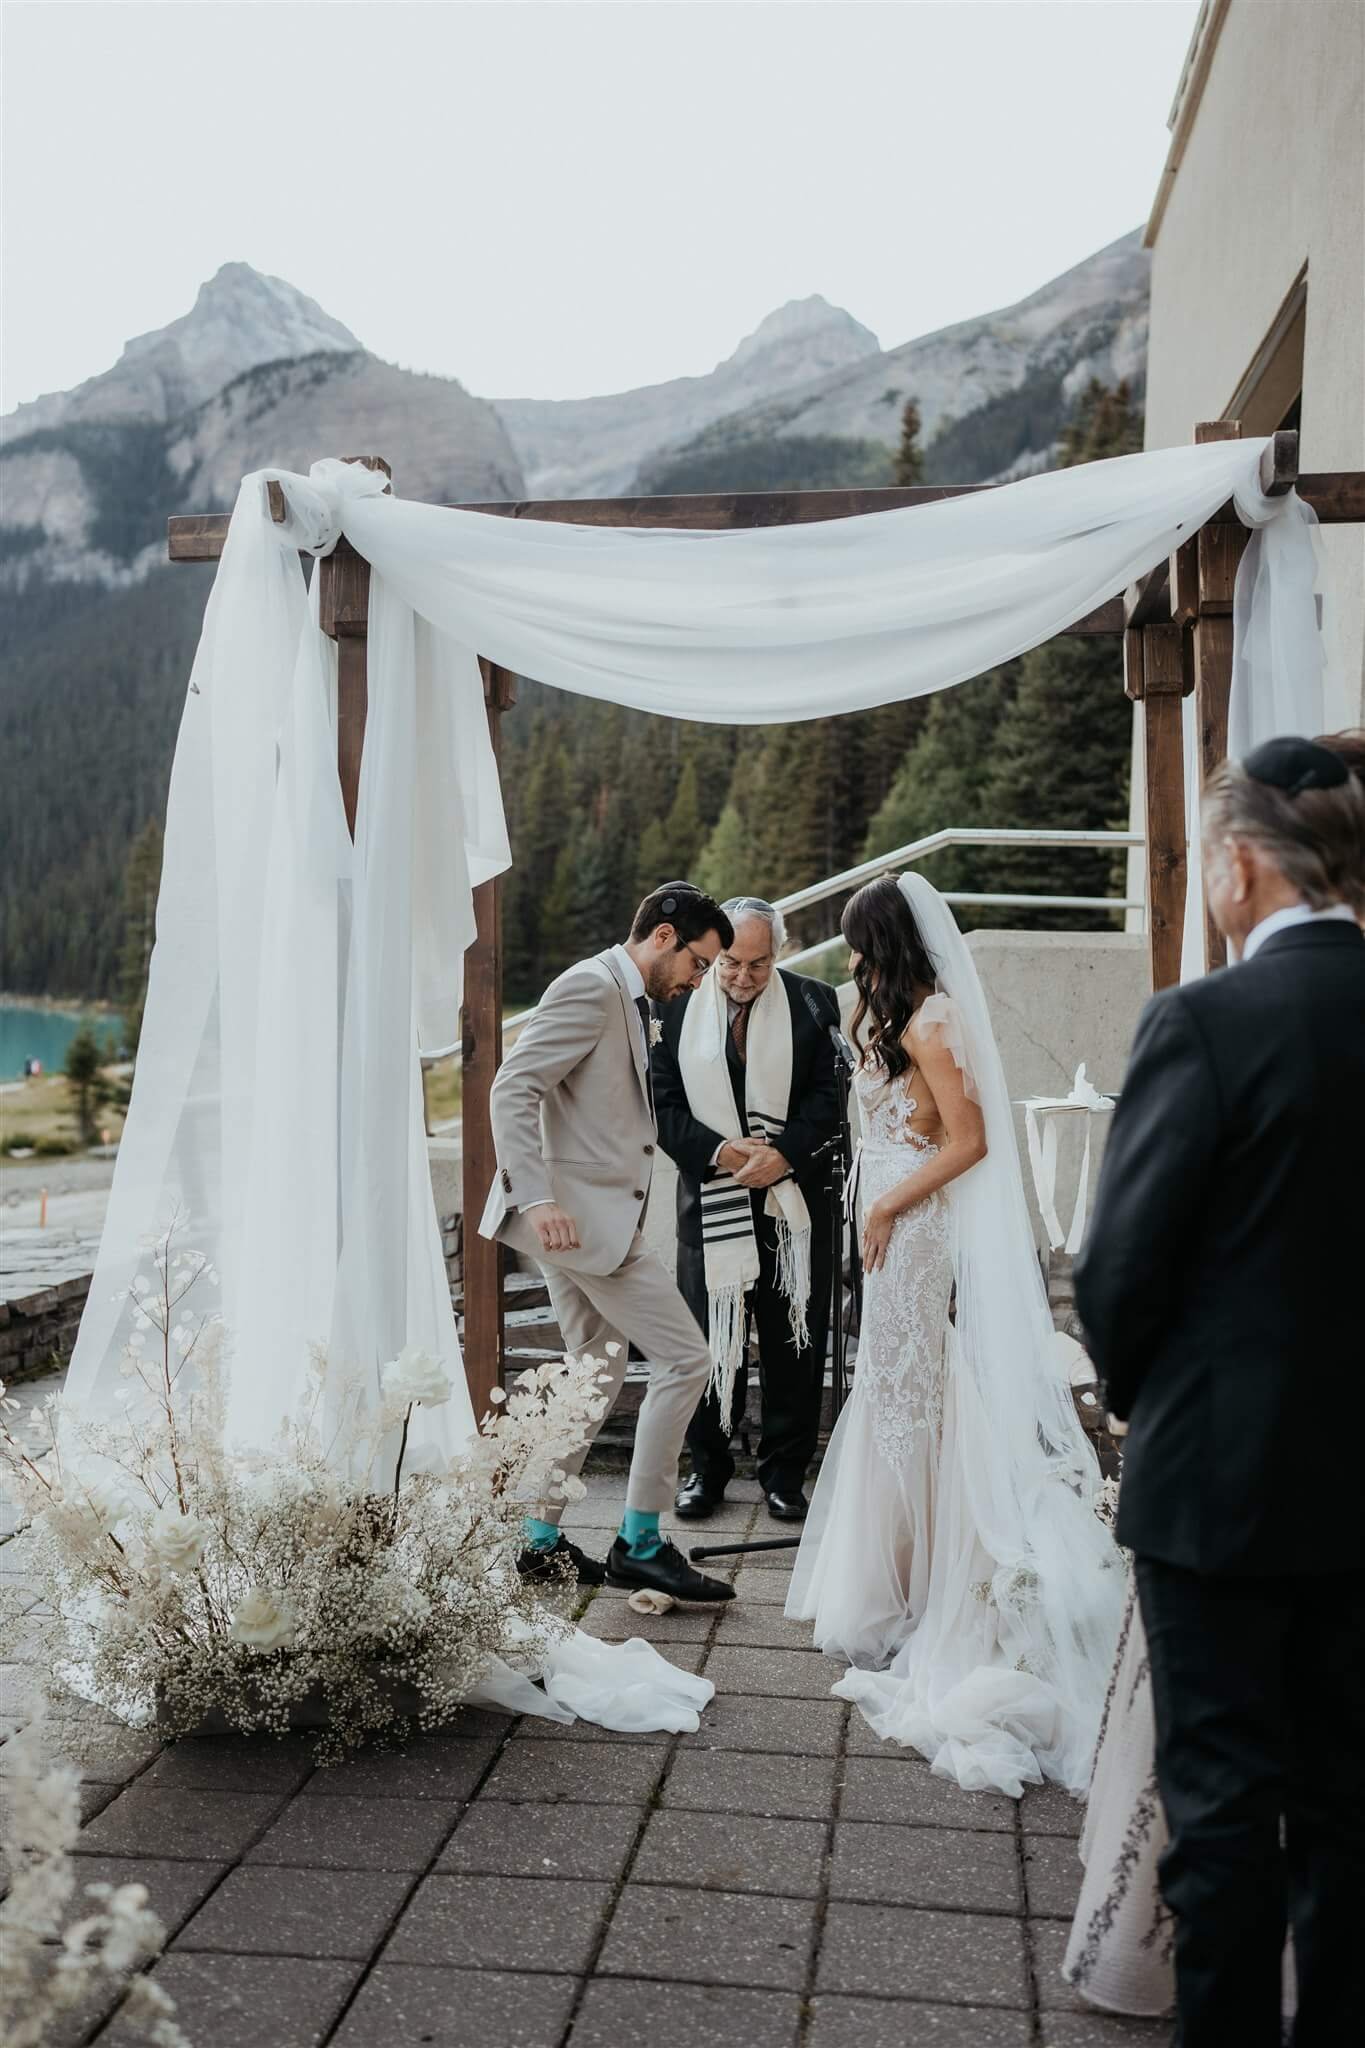 Groom stomps on glass for Jewish wedding tradition at outdoor wedding ceremony